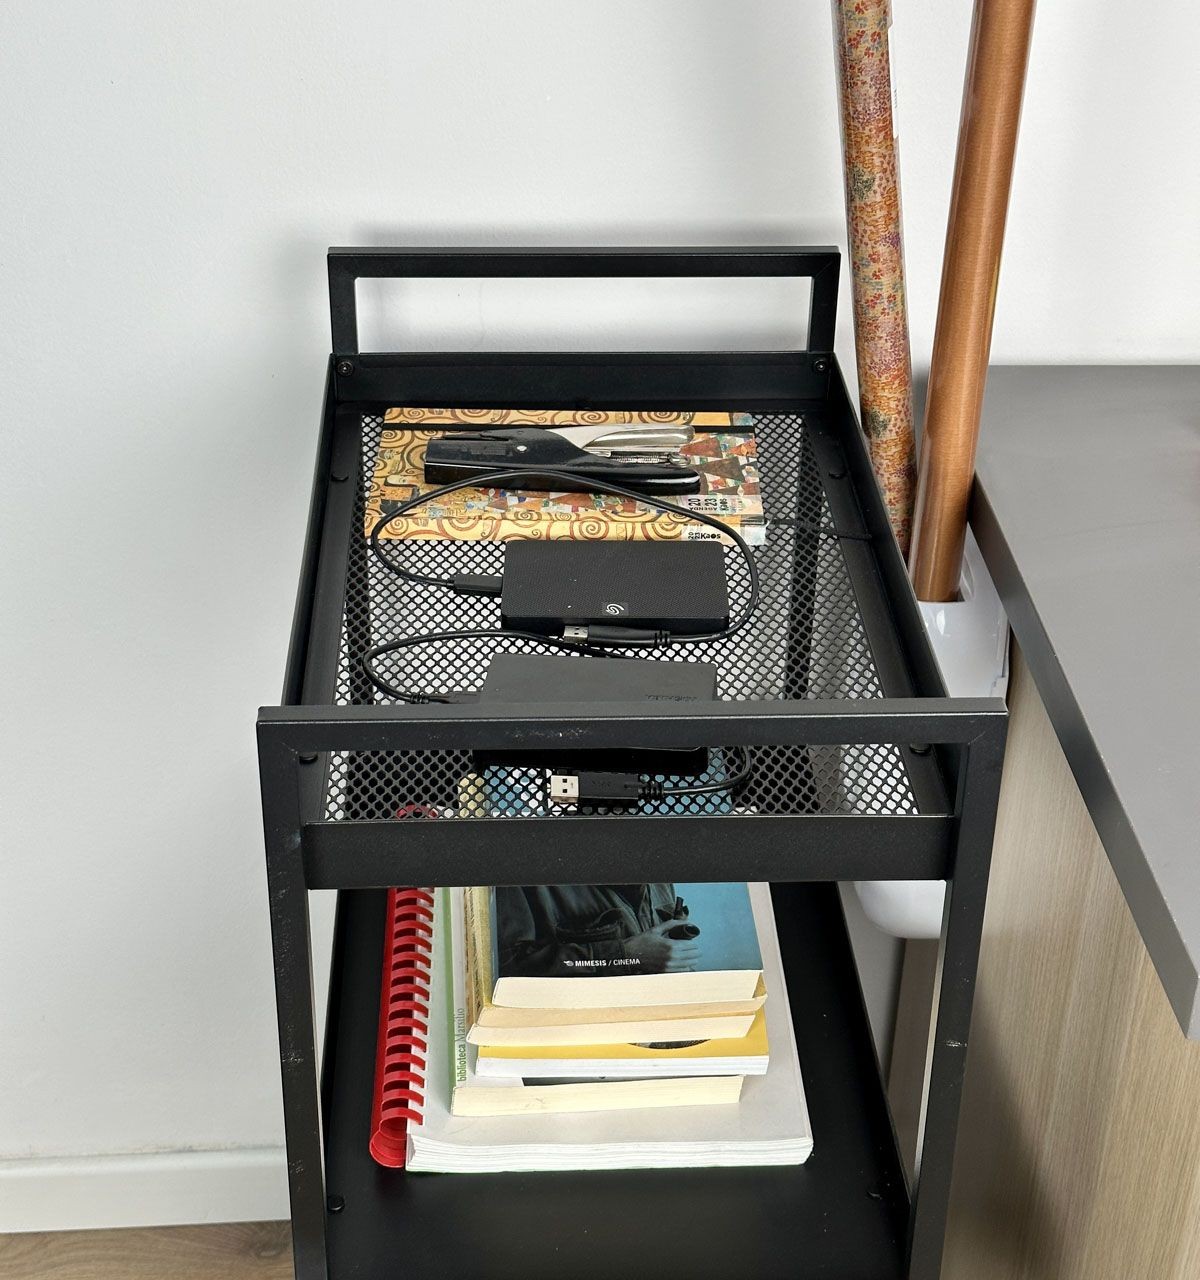 Keep a Cart Next to the Desk for Additional Storage Space